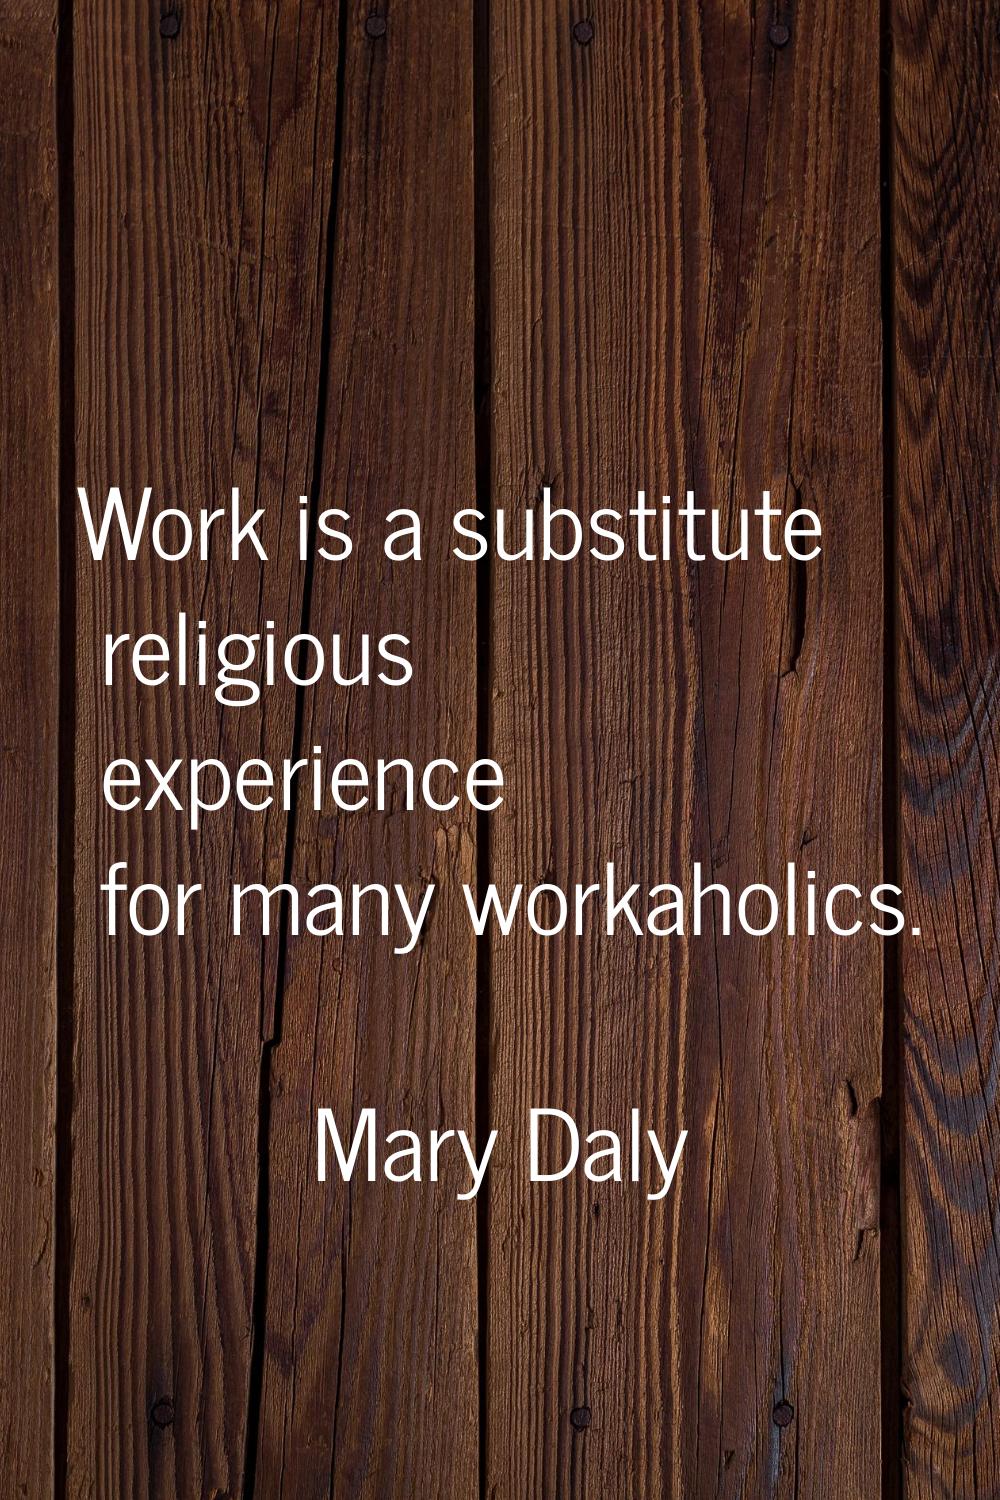 Work is a substitute religious experience for many workaholics.